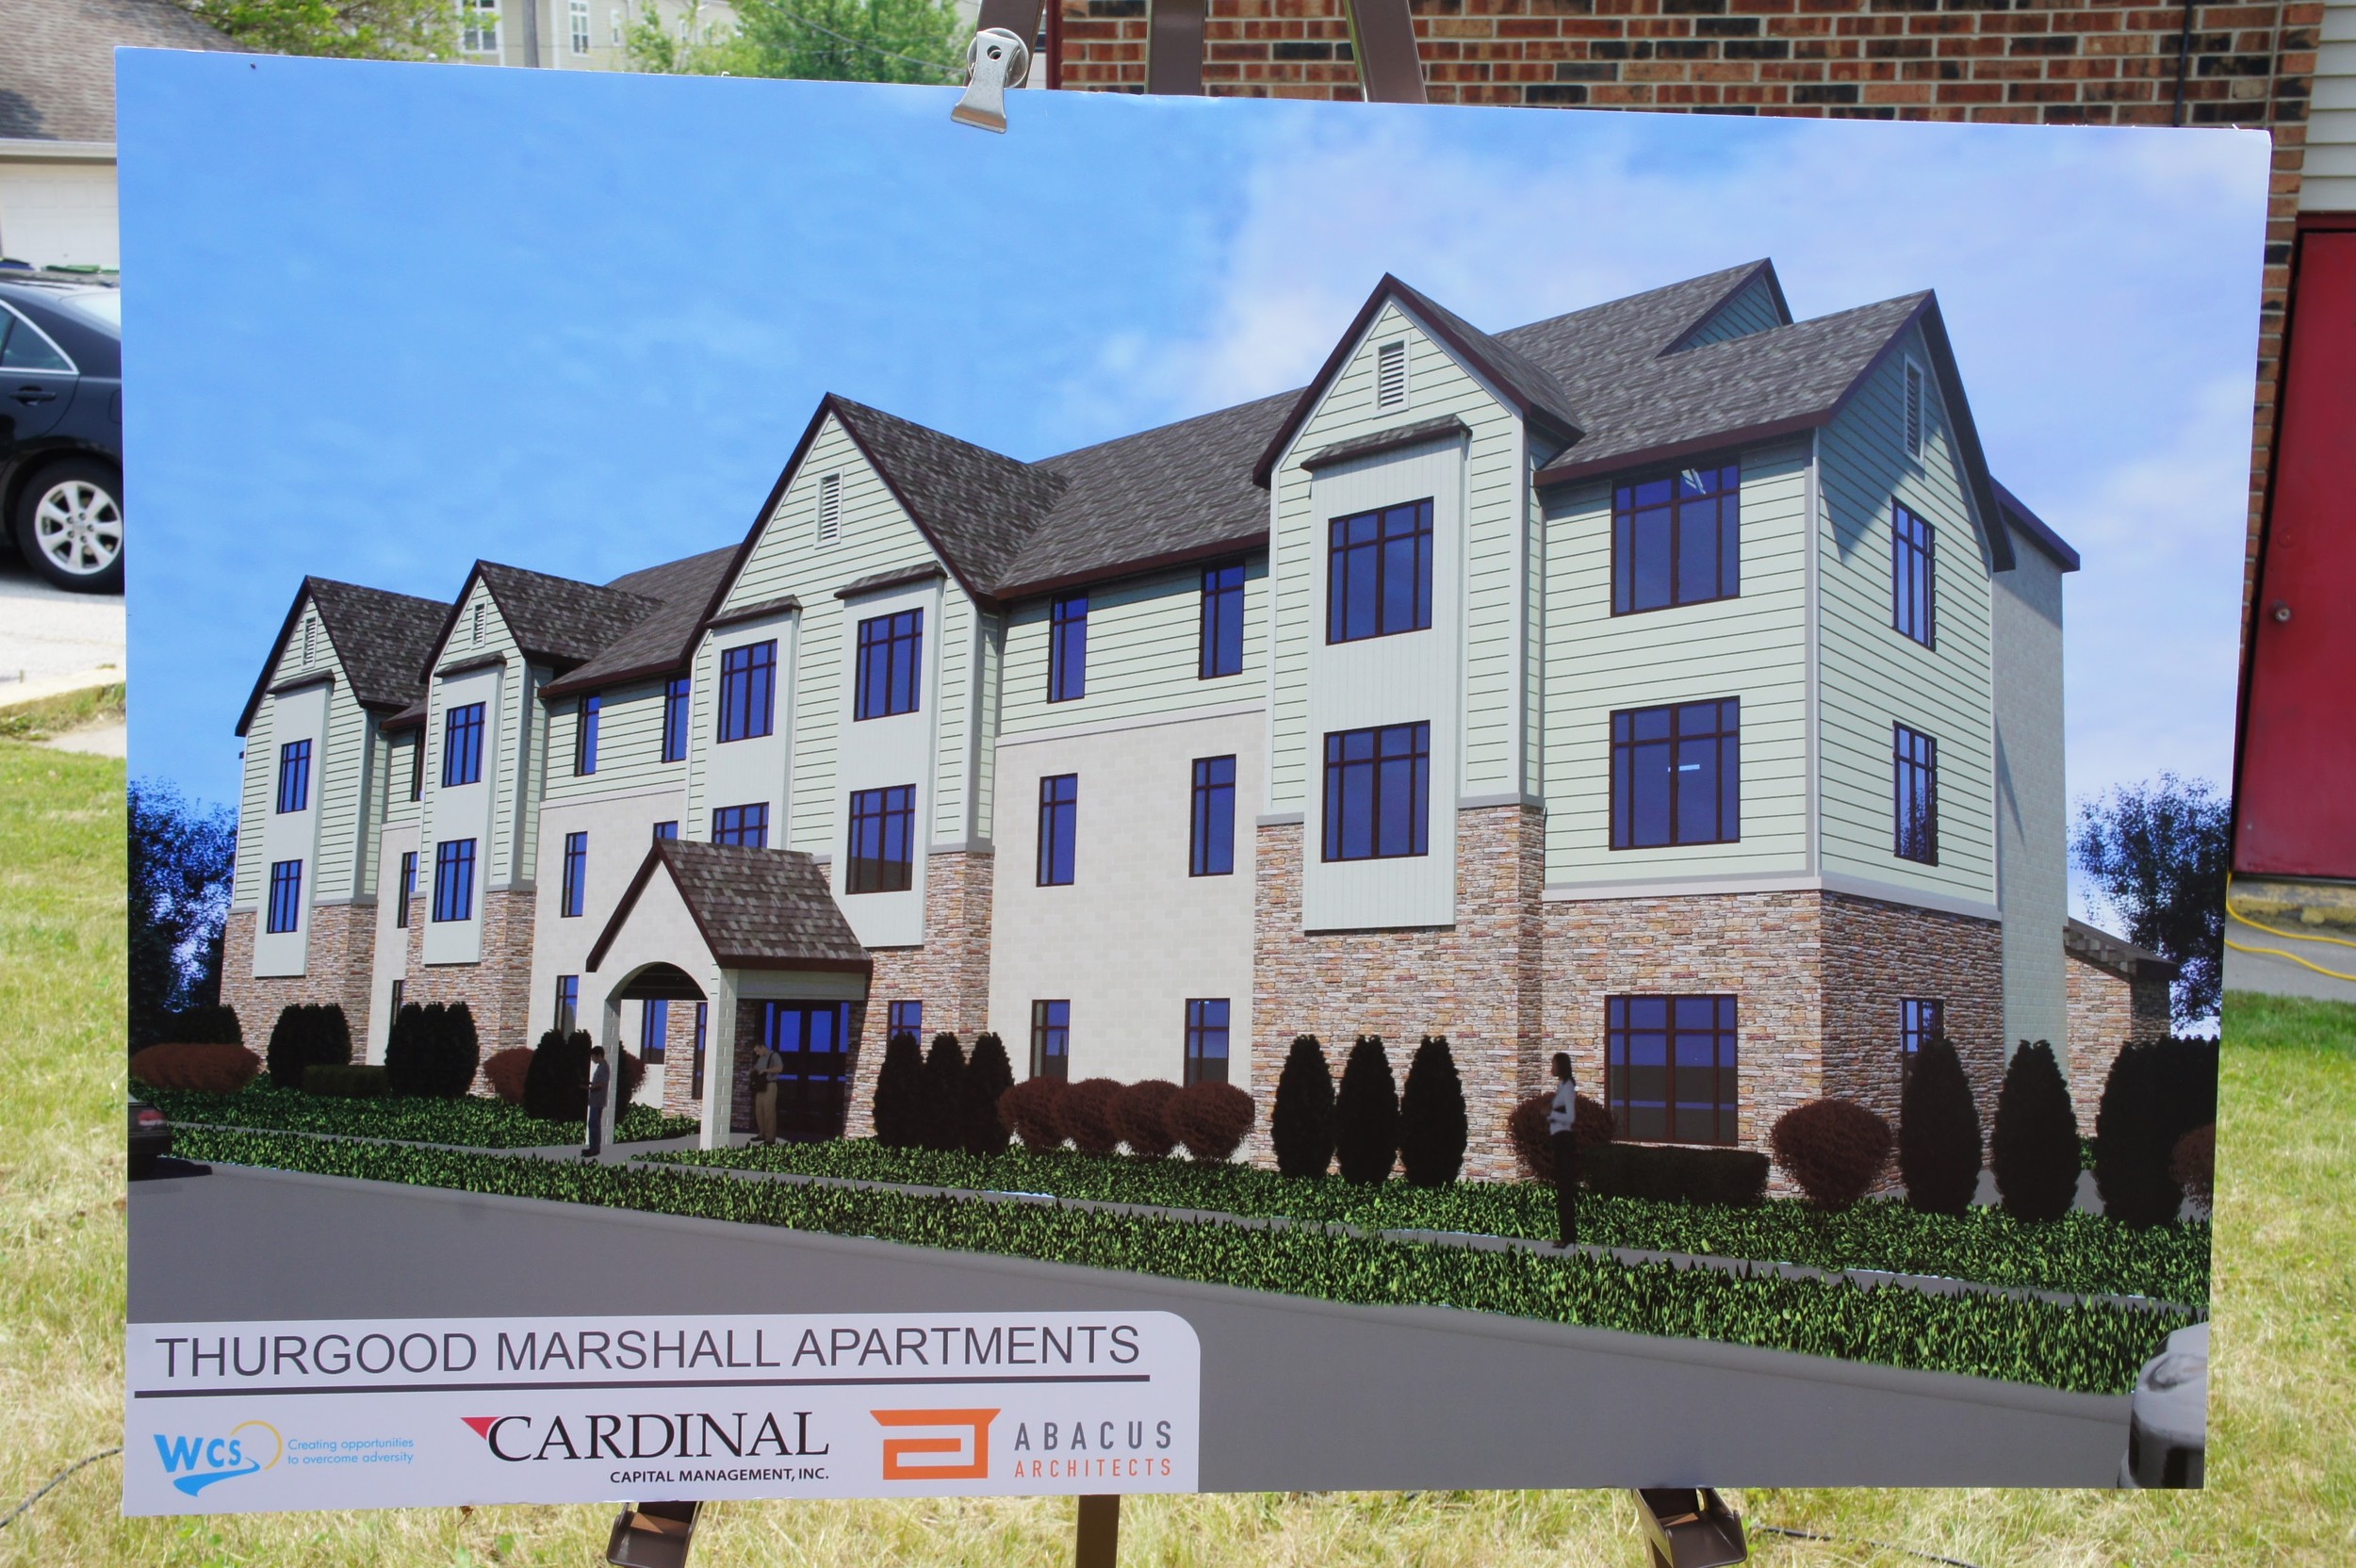 New rendering of Thurgood Marshall Apartments